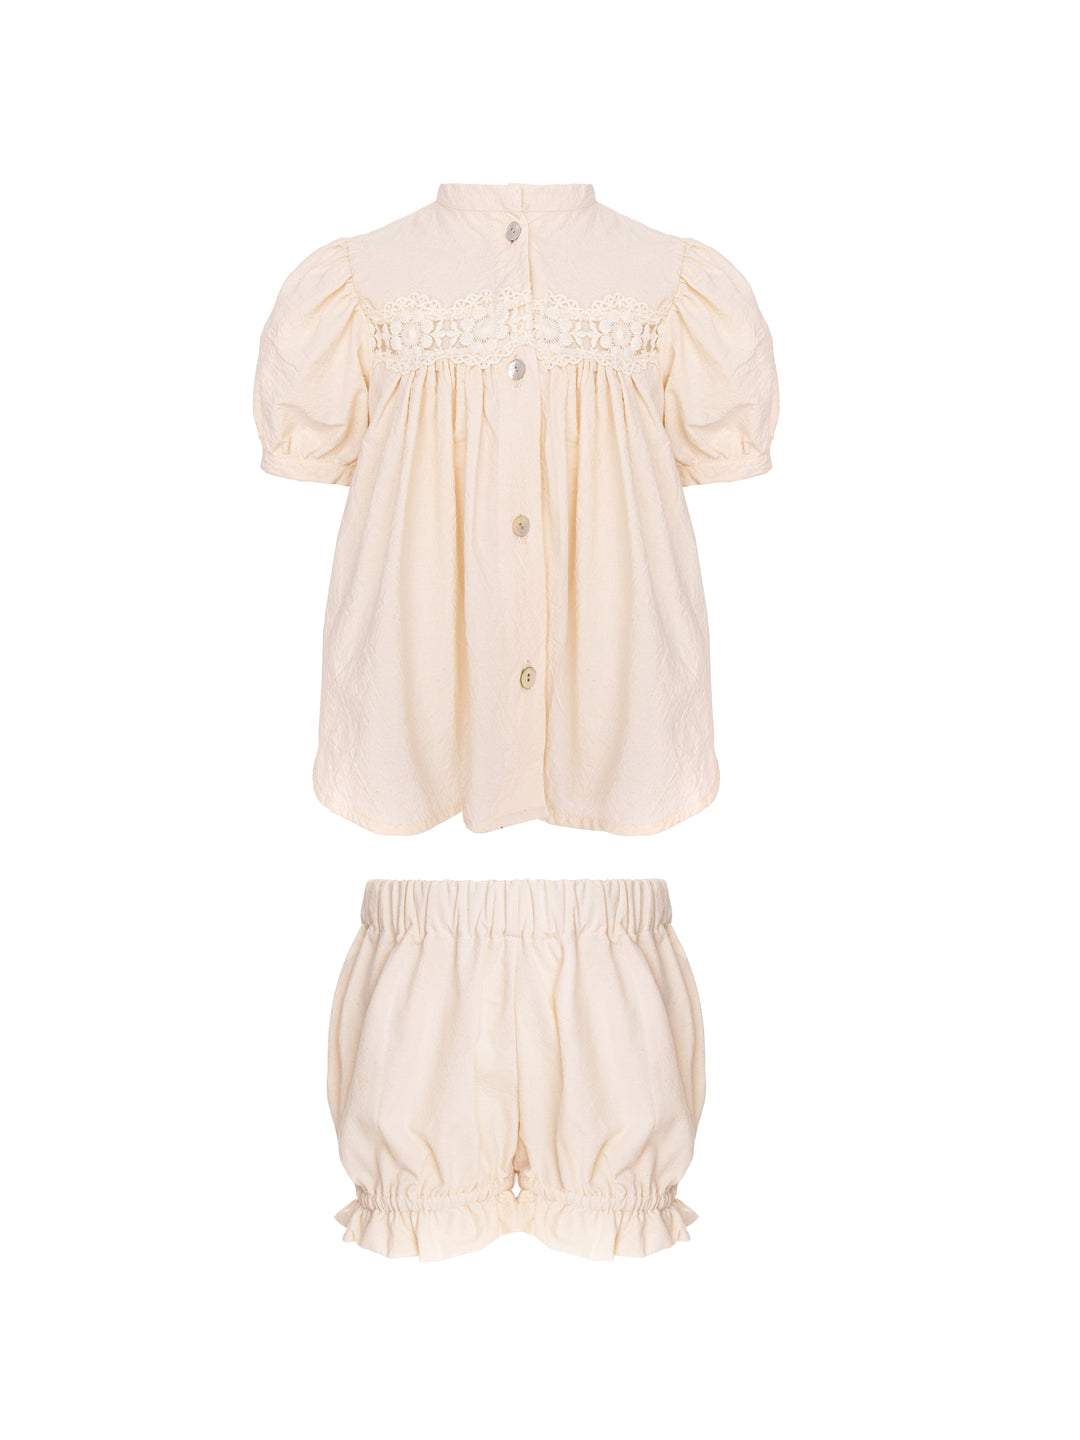 SERENITY BABY SET (BLOUSE AND BLOOMERS)-BEIGE WITH LACE INSERTION